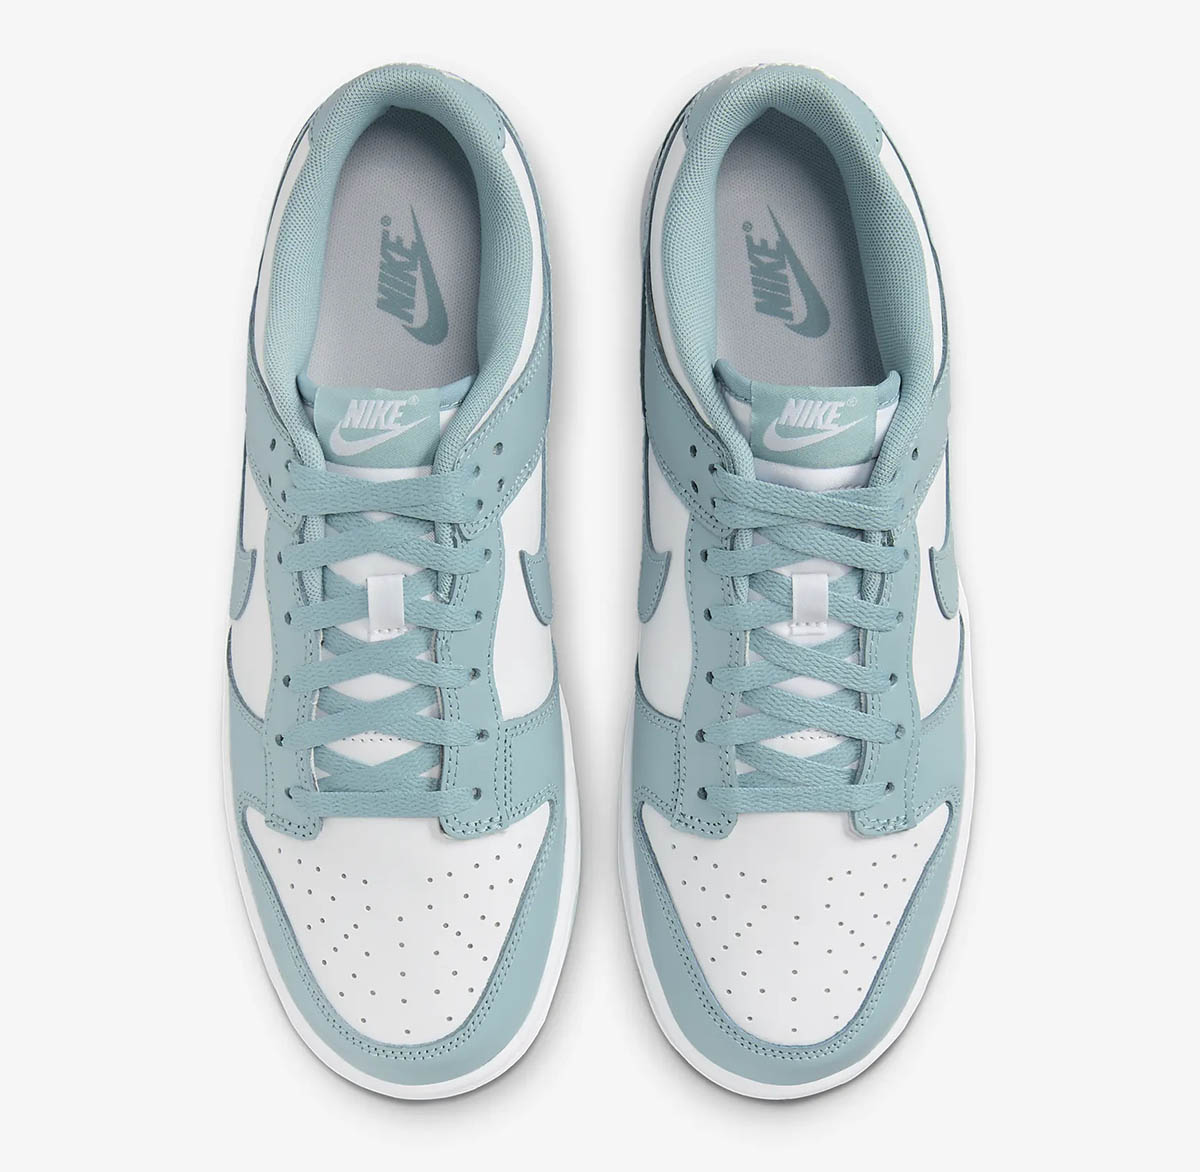 Nike Dunk Low Denim Turquoise Shoes 4